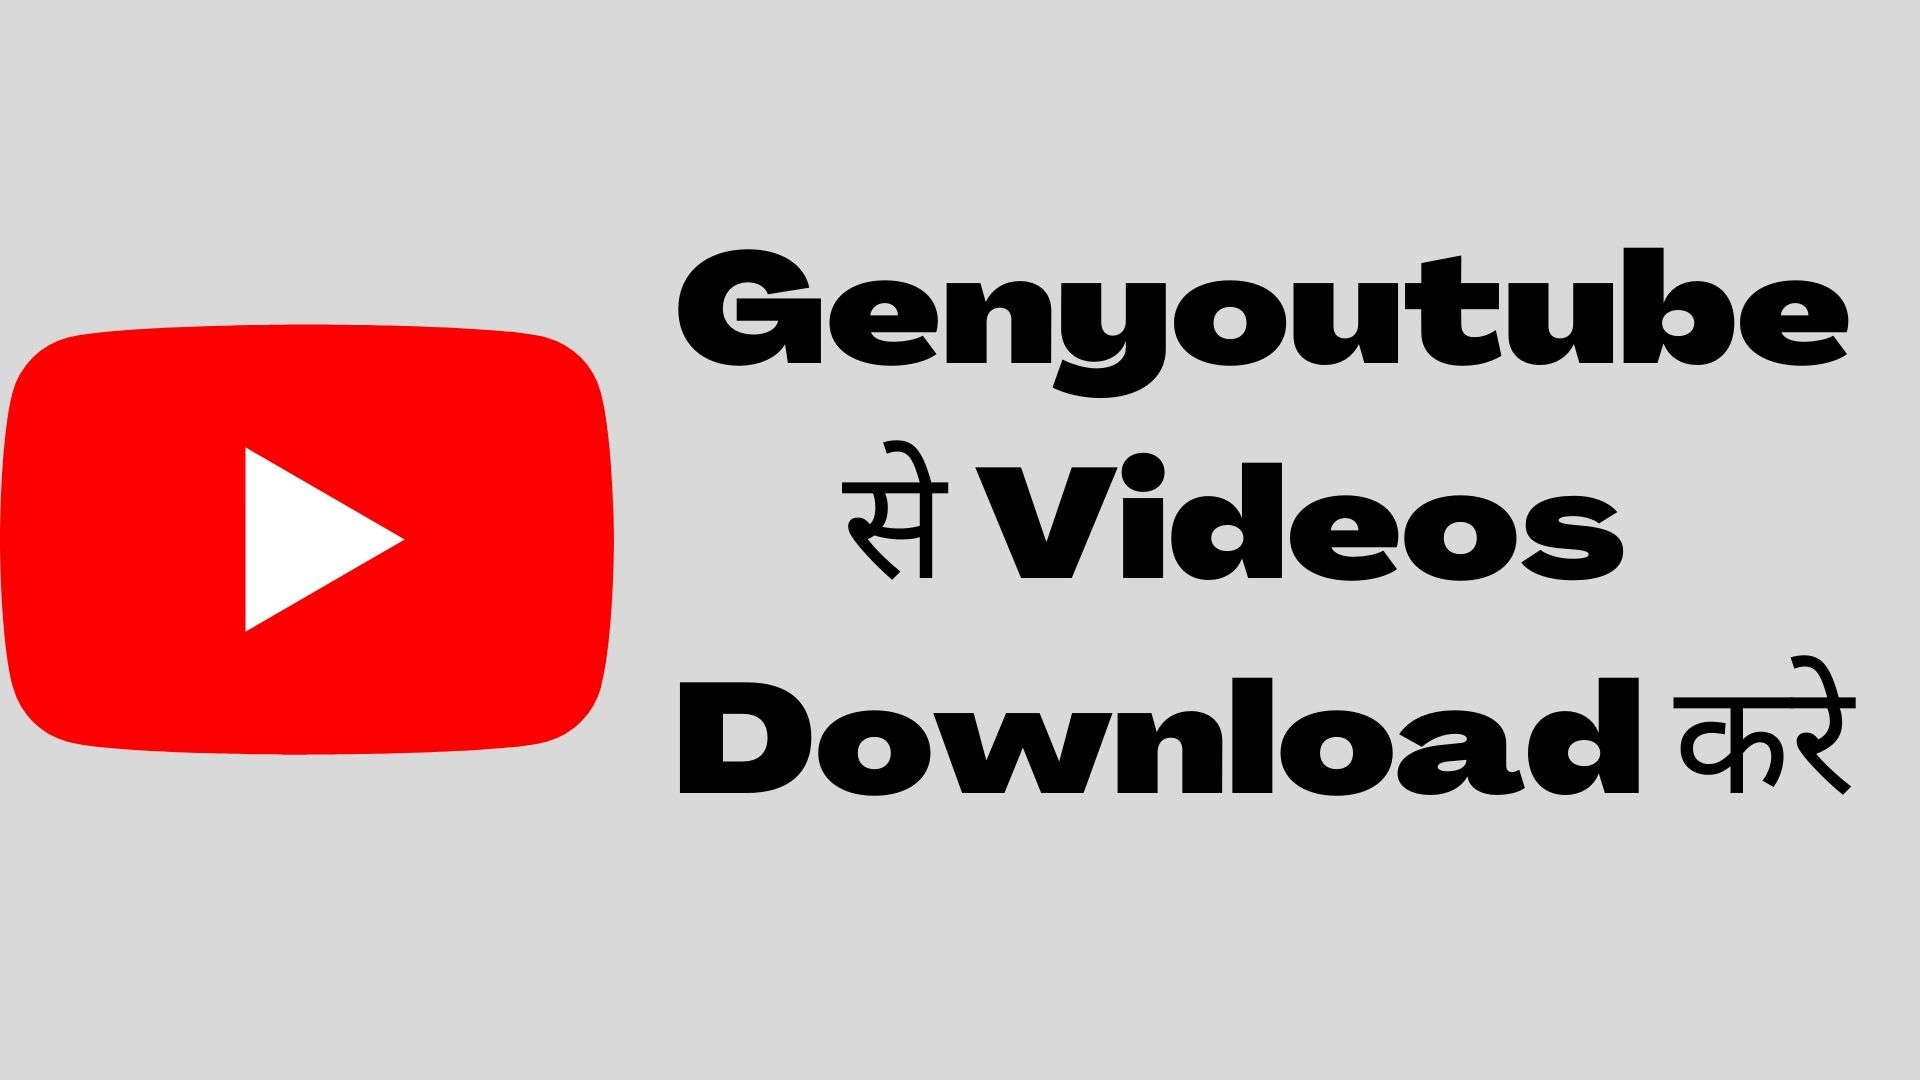 GenYoutube – Download Youtube Videos 1080p